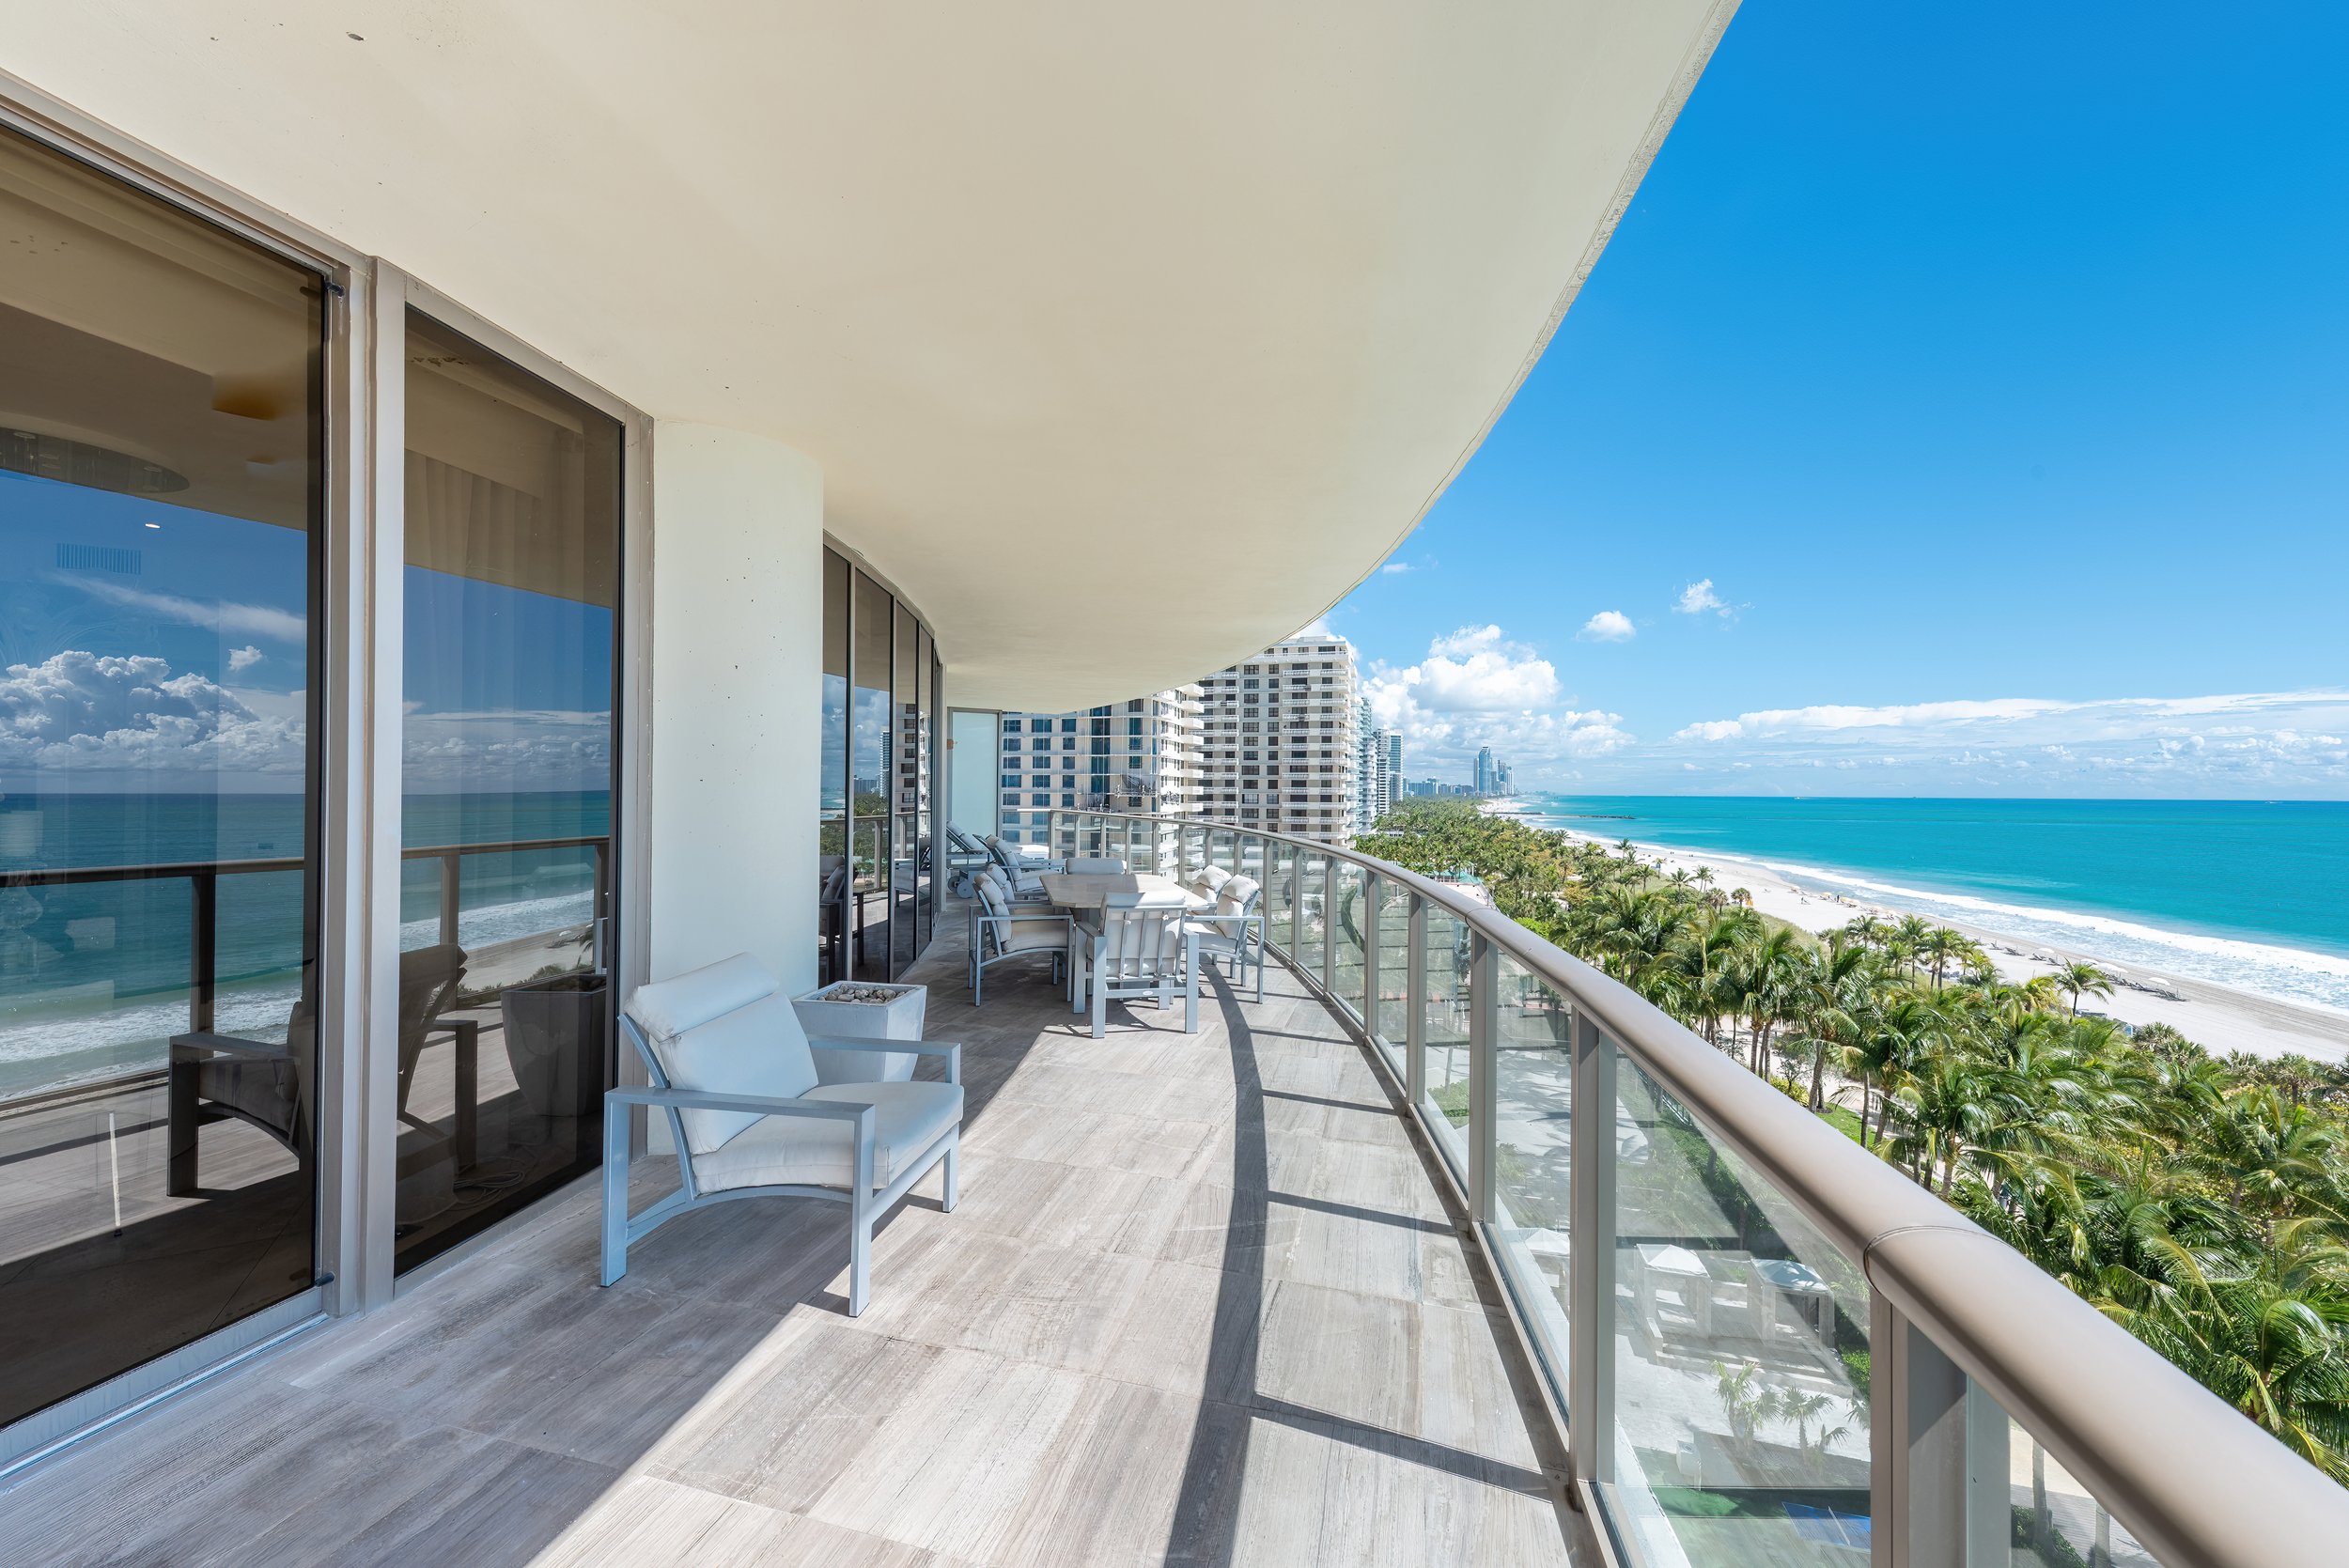 Master Brokers Forum Listing: See The Views From This Beachfront Condo In St. Regis Bal Harbour Asking $10.995 Million 3.JPG